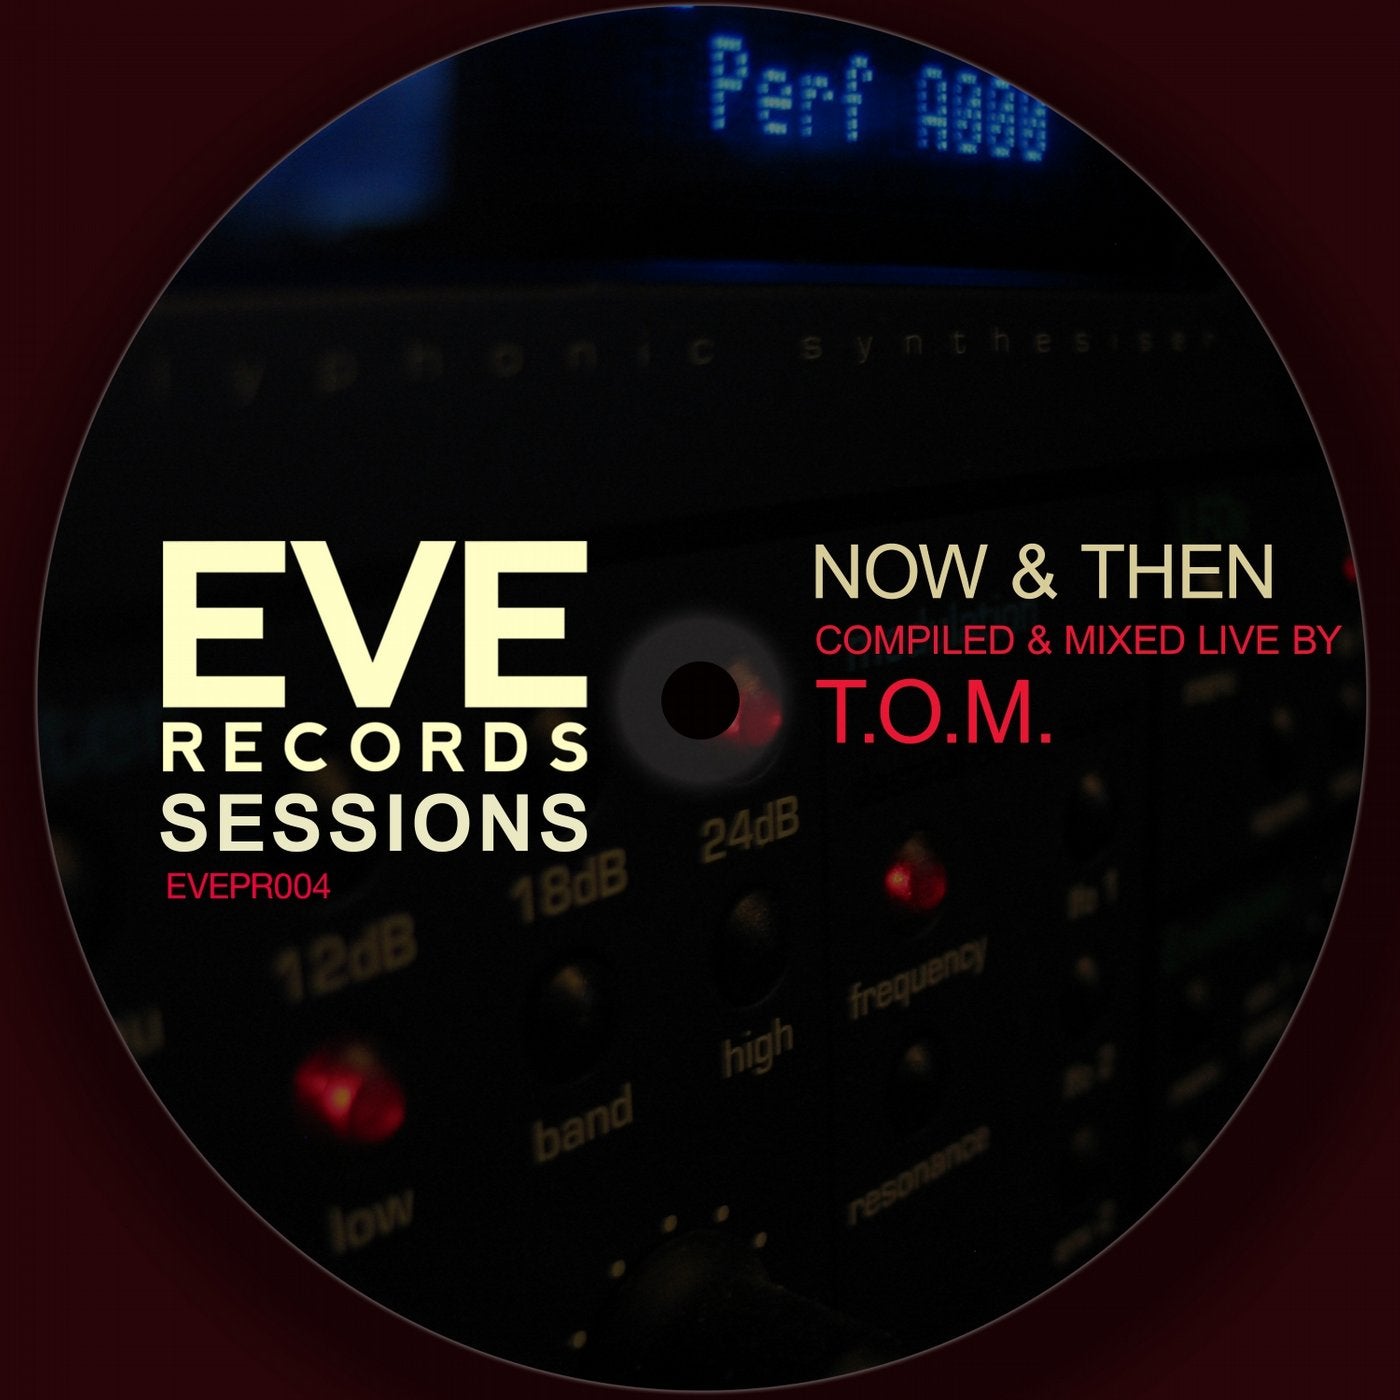 Eve Records Sessions - Now & Then